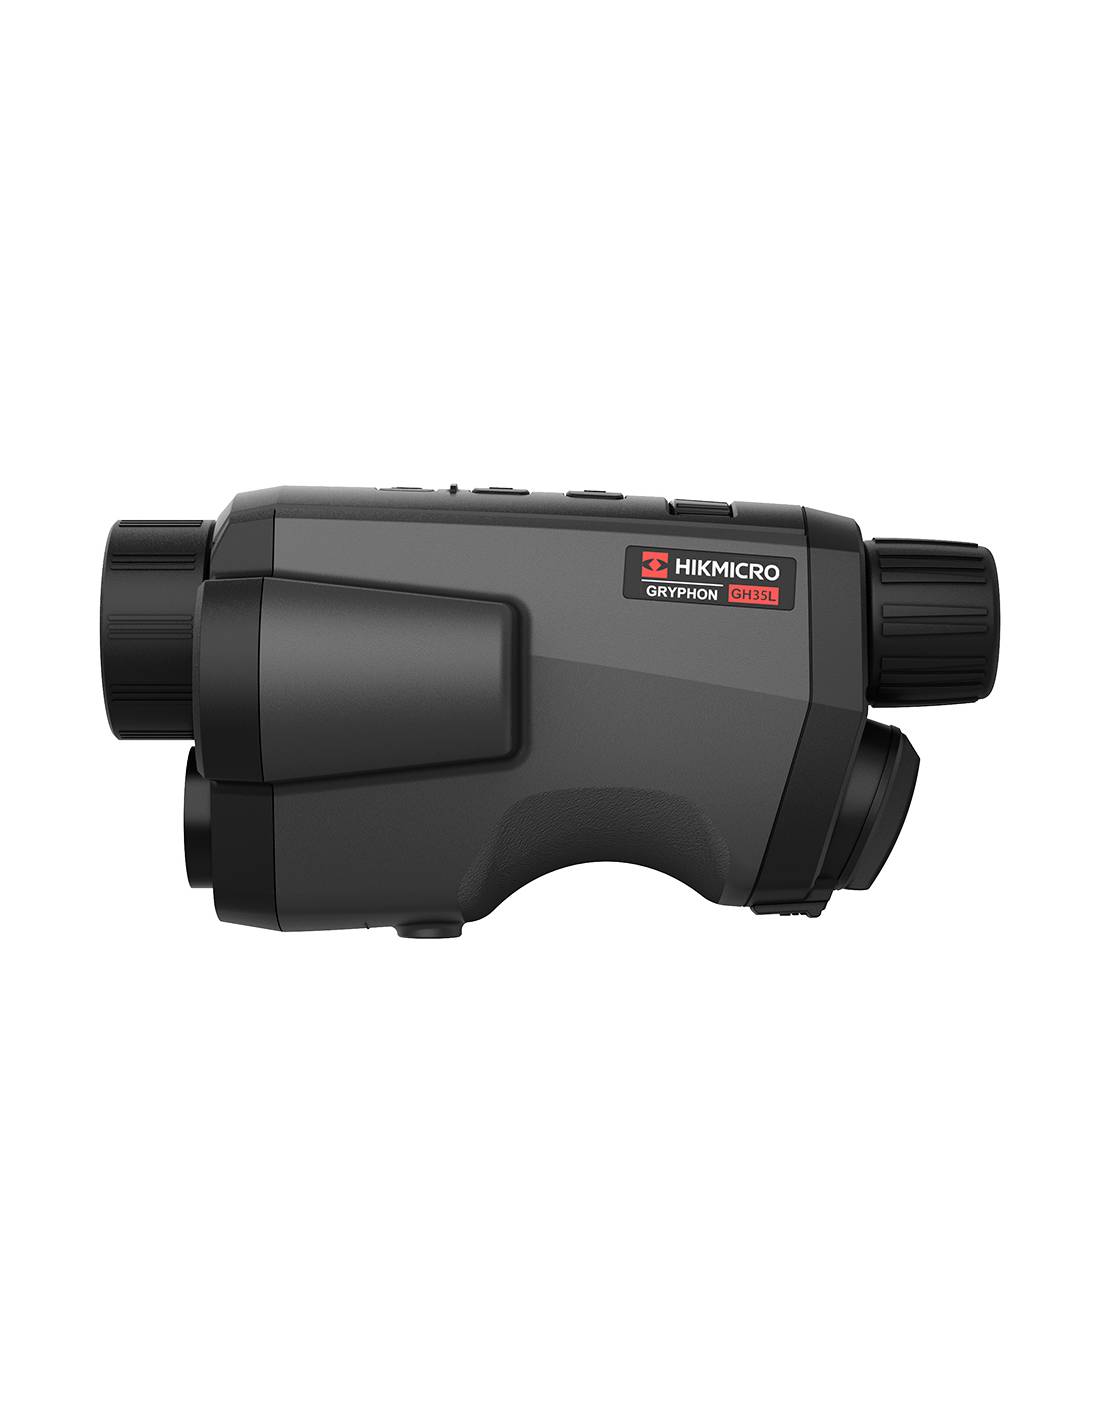 Giveaway for Gryphon Fusion GH35L Bispectral Imaging Thermal Monocular